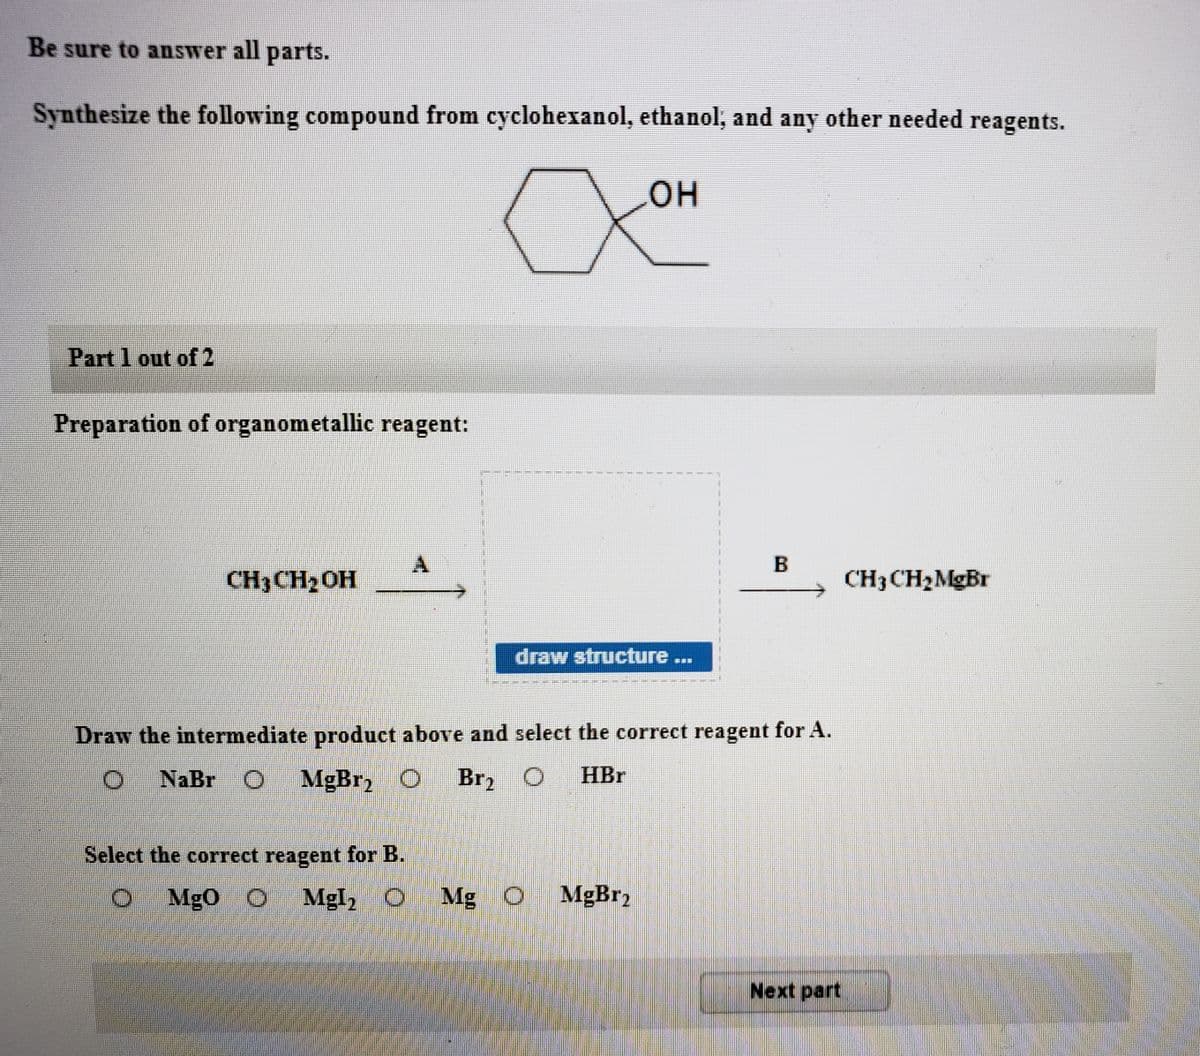 Be sure to answer all parts.
Synthesize the following compound from cyclohexanol, ethanol, and any other needed reagents.
он
Part 1 out of 2
Preparation of organometallic reagent:
B
CH3CH2OH
CH3CH2MGB.
draw structure...
Draw the intermediate product above and select the correct reagent for A.
NaBr O
MgBr2
Br2
HBr
Select the correct reagent for B.
O Mgo O
Mgl, O Mg O MgBr2
Next part
